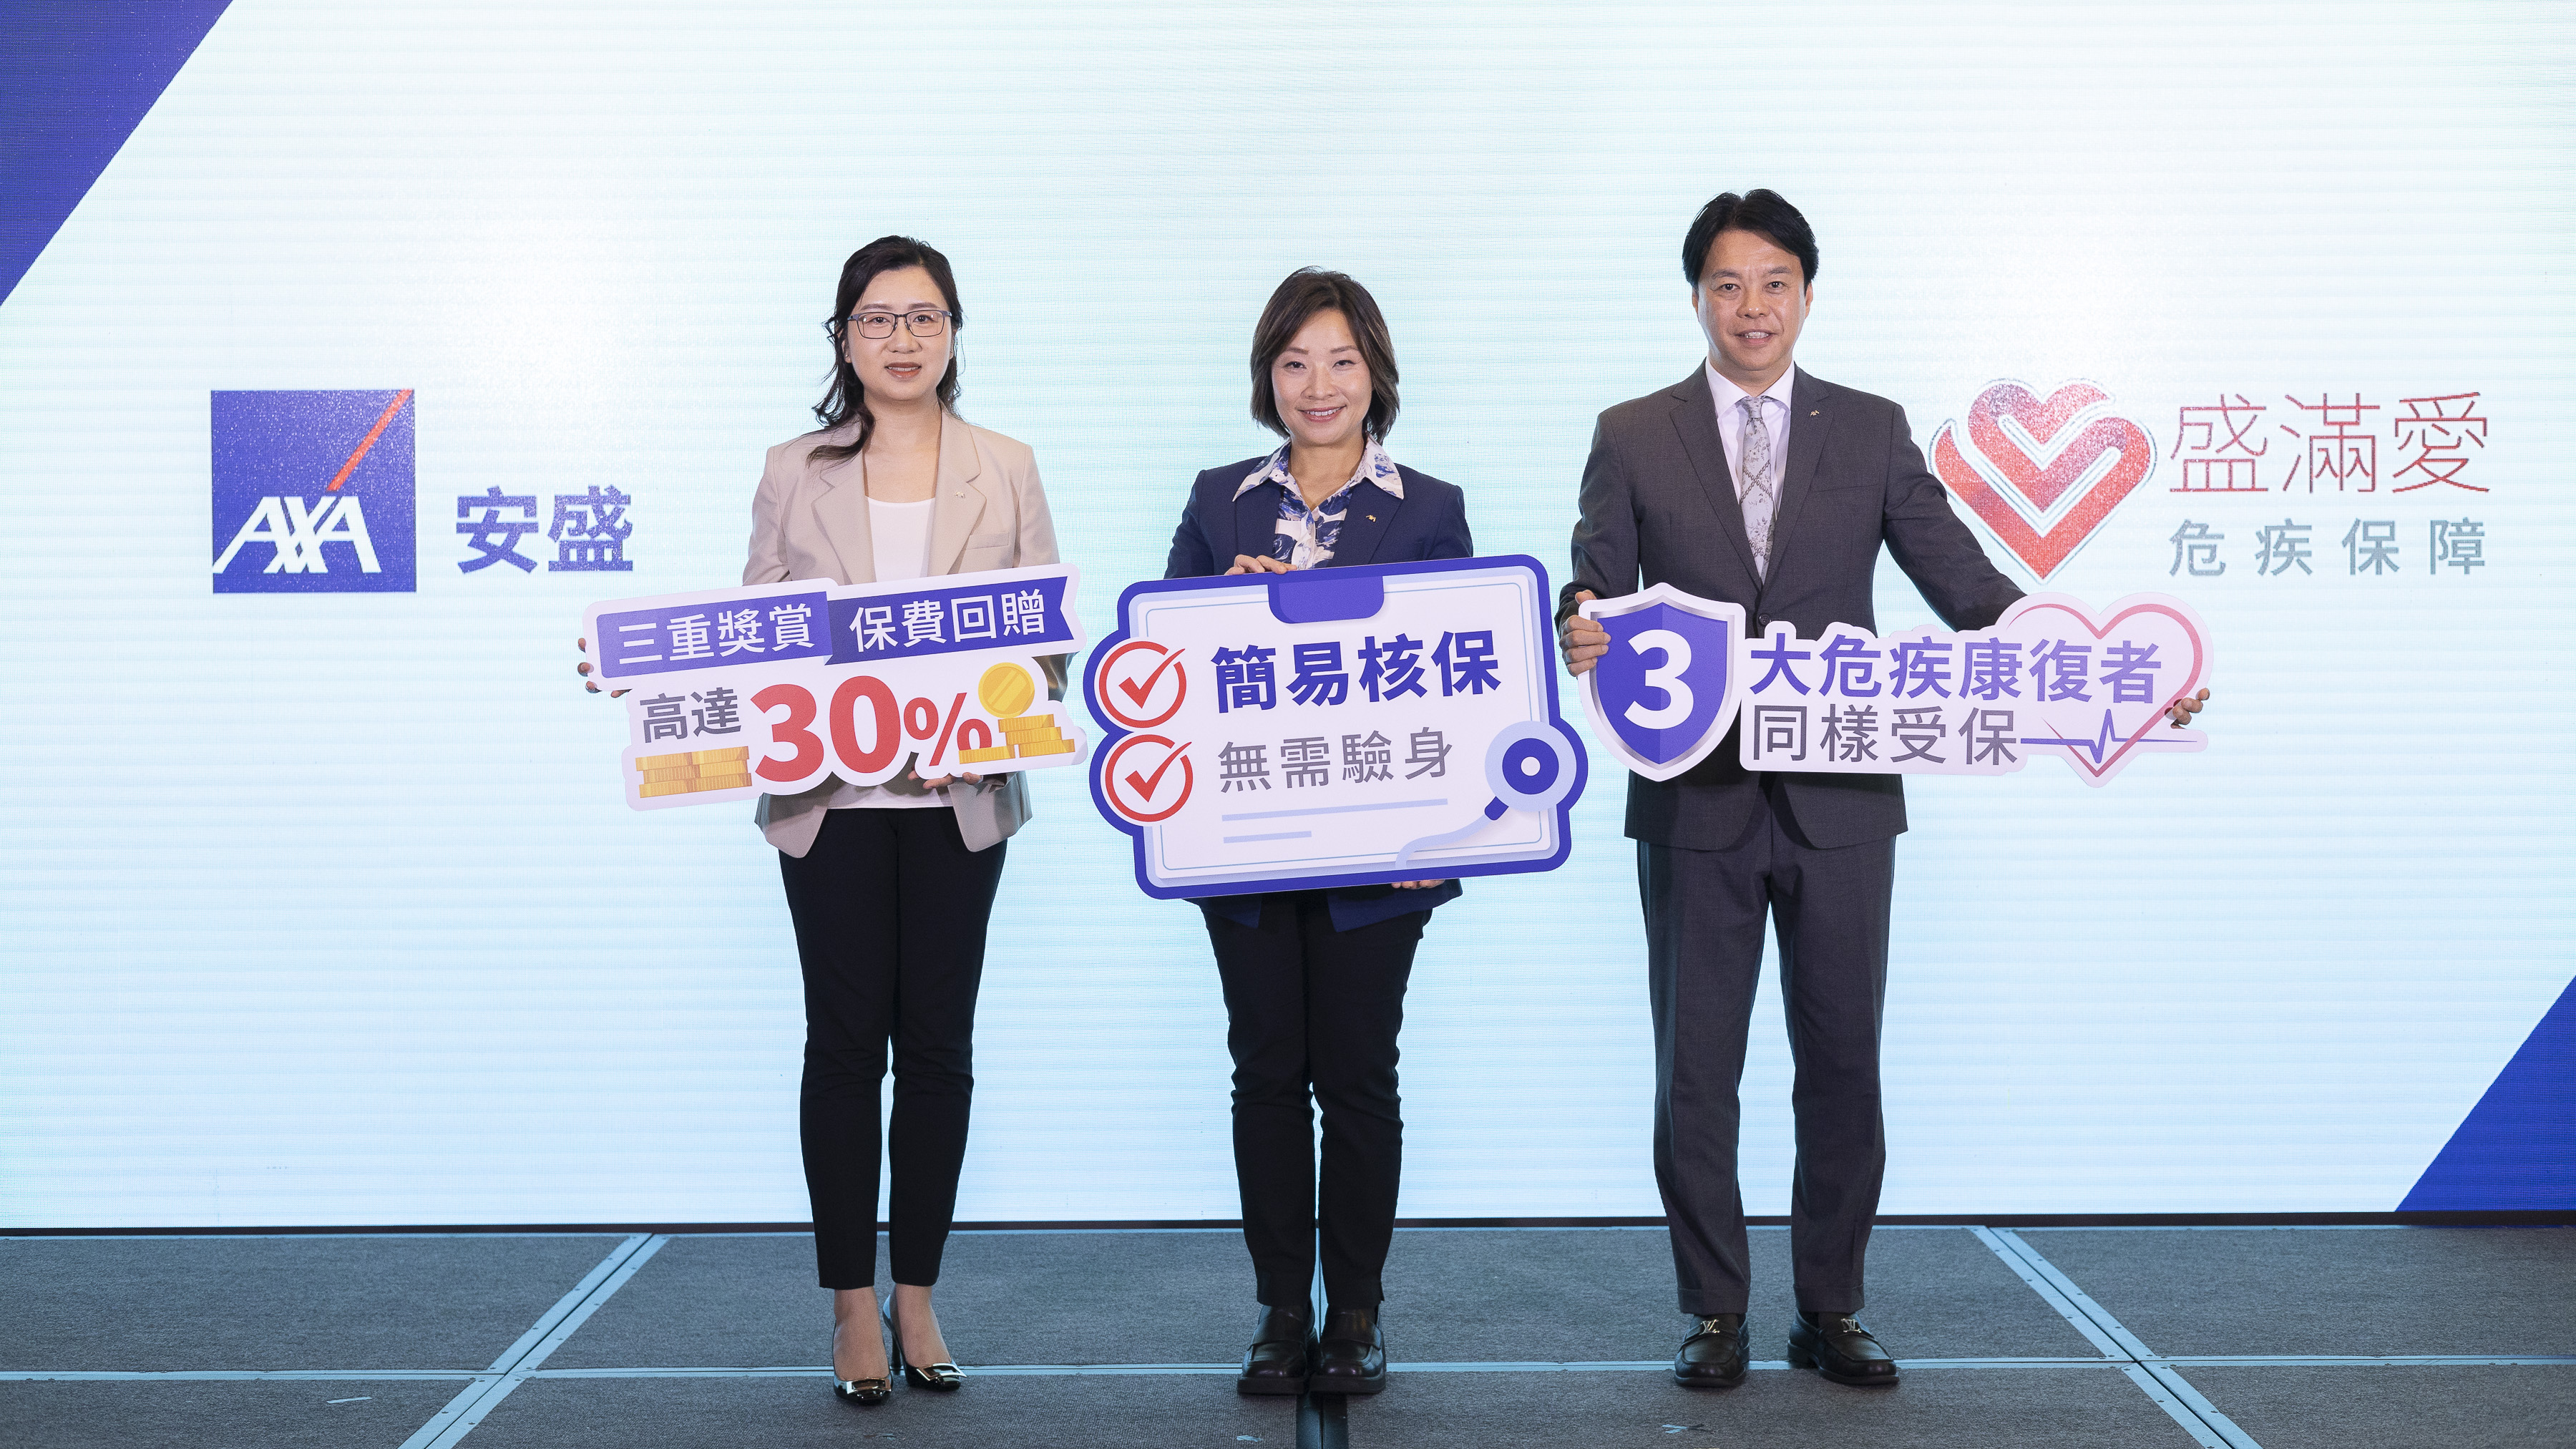 [from left] Janet Lee, Chief Life and Health Insurance Officer of AXA Hong Kong and Macau, Sally Wan, Chief Executive Officer of AXA Greater China and Howard Pou, Chief Distribution Officer of AXA Greater China announce the launch of CareForAll Critical Illness Plan.